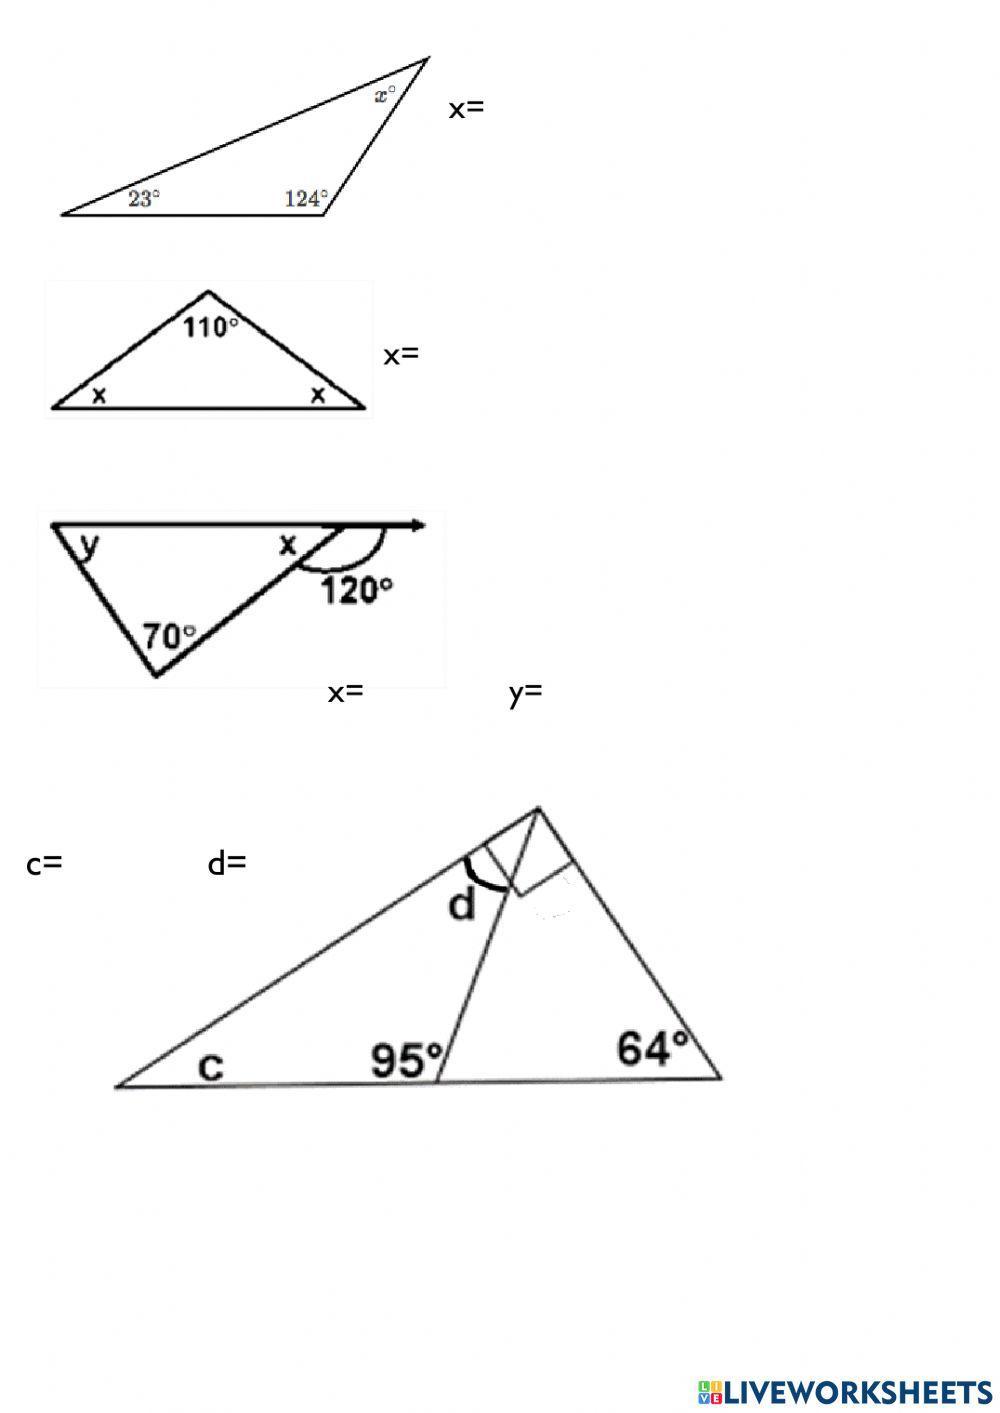 Triangles: find the angle